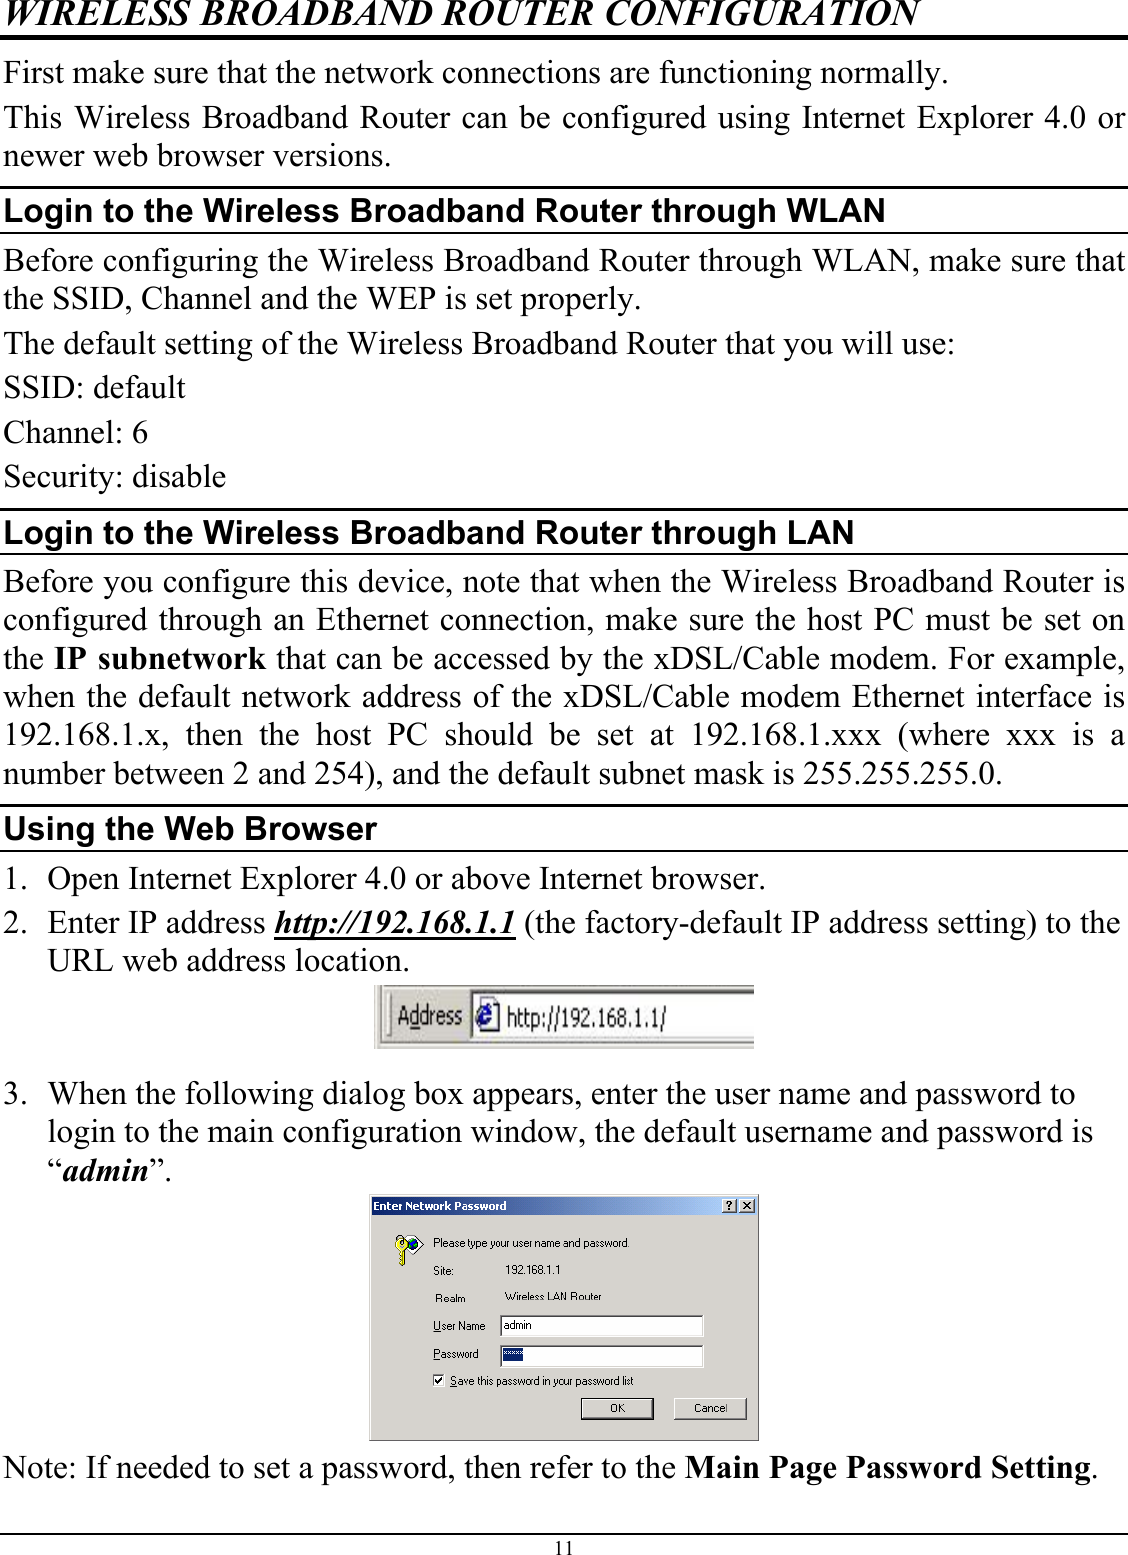 11 WIRELESS BROADBAND ROUTER CONFIGURATION First make sure that the network connections are functioning normally.  This Wireless Broadband Router can be configured using Internet Explorer 4.0 or newer web browser versions. Login to the Wireless Broadband Router through WLAN Before configuring the Wireless Broadband Router through WLAN, make sure that the SSID, Channel and the WEP is set properly. The default setting of the Wireless Broadband Router that you will use: SSID: default Channel: 6 Security: disable Login to the Wireless Broadband Router through LAN Before you configure this device, note that when the Wireless Broadband Router is configured through an Ethernet connection, make sure the host PC must be set on the IP subnetwork that can be accessed by the xDSL/Cable modem. For example, when the default network address of the xDSL/Cable modem Ethernet interface is 192.168.1.x, then the host PC should be set at 192.168.1.xxx (where xxx is a number between 2 and 254), and the default subnet mask is 255.255.255.0. Using the Web Browser 1. Open Internet Explorer 4.0 or above Internet browser. 2. Enter IP address http://192.168.1.1 (the factory-default IP address setting) to the URL web address location.  3. When the following dialog box appears, enter the user name and password to login to the main configuration window, the default username and password is “admin”.  Note: If needed to set a password, then refer to the Main Page Password Setting. 